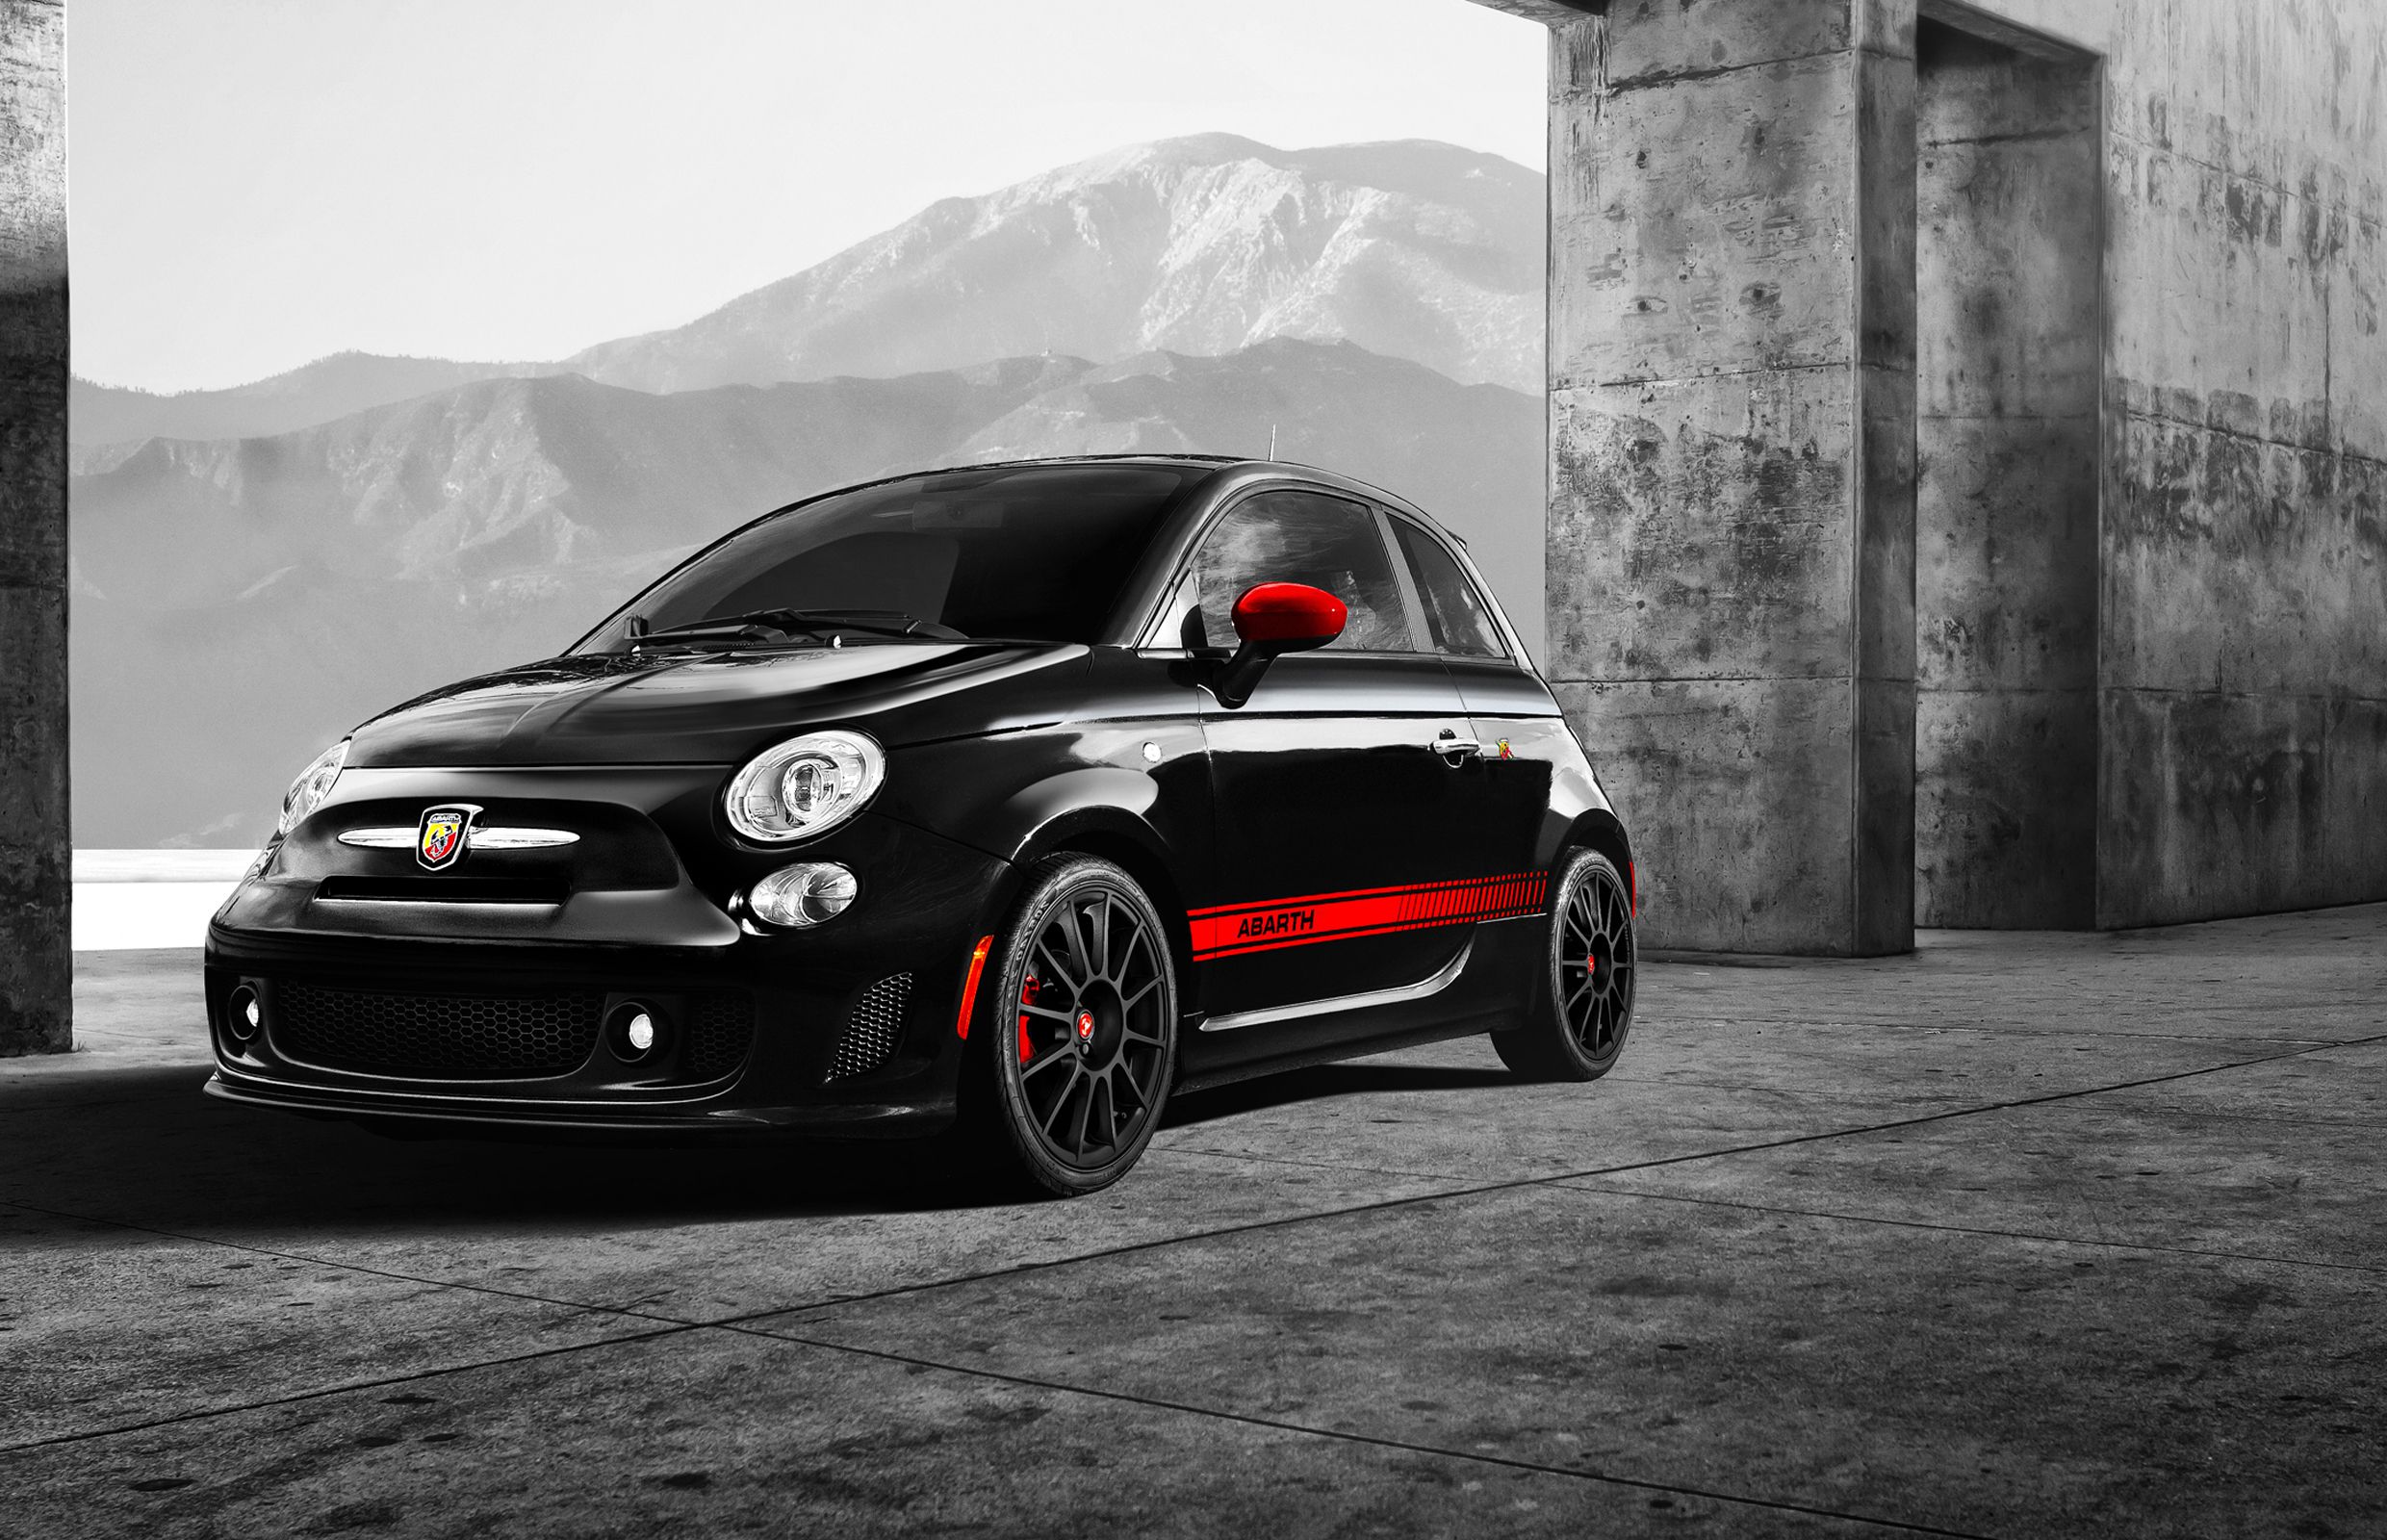 Fiat plans 500 and 500c Gucci editions